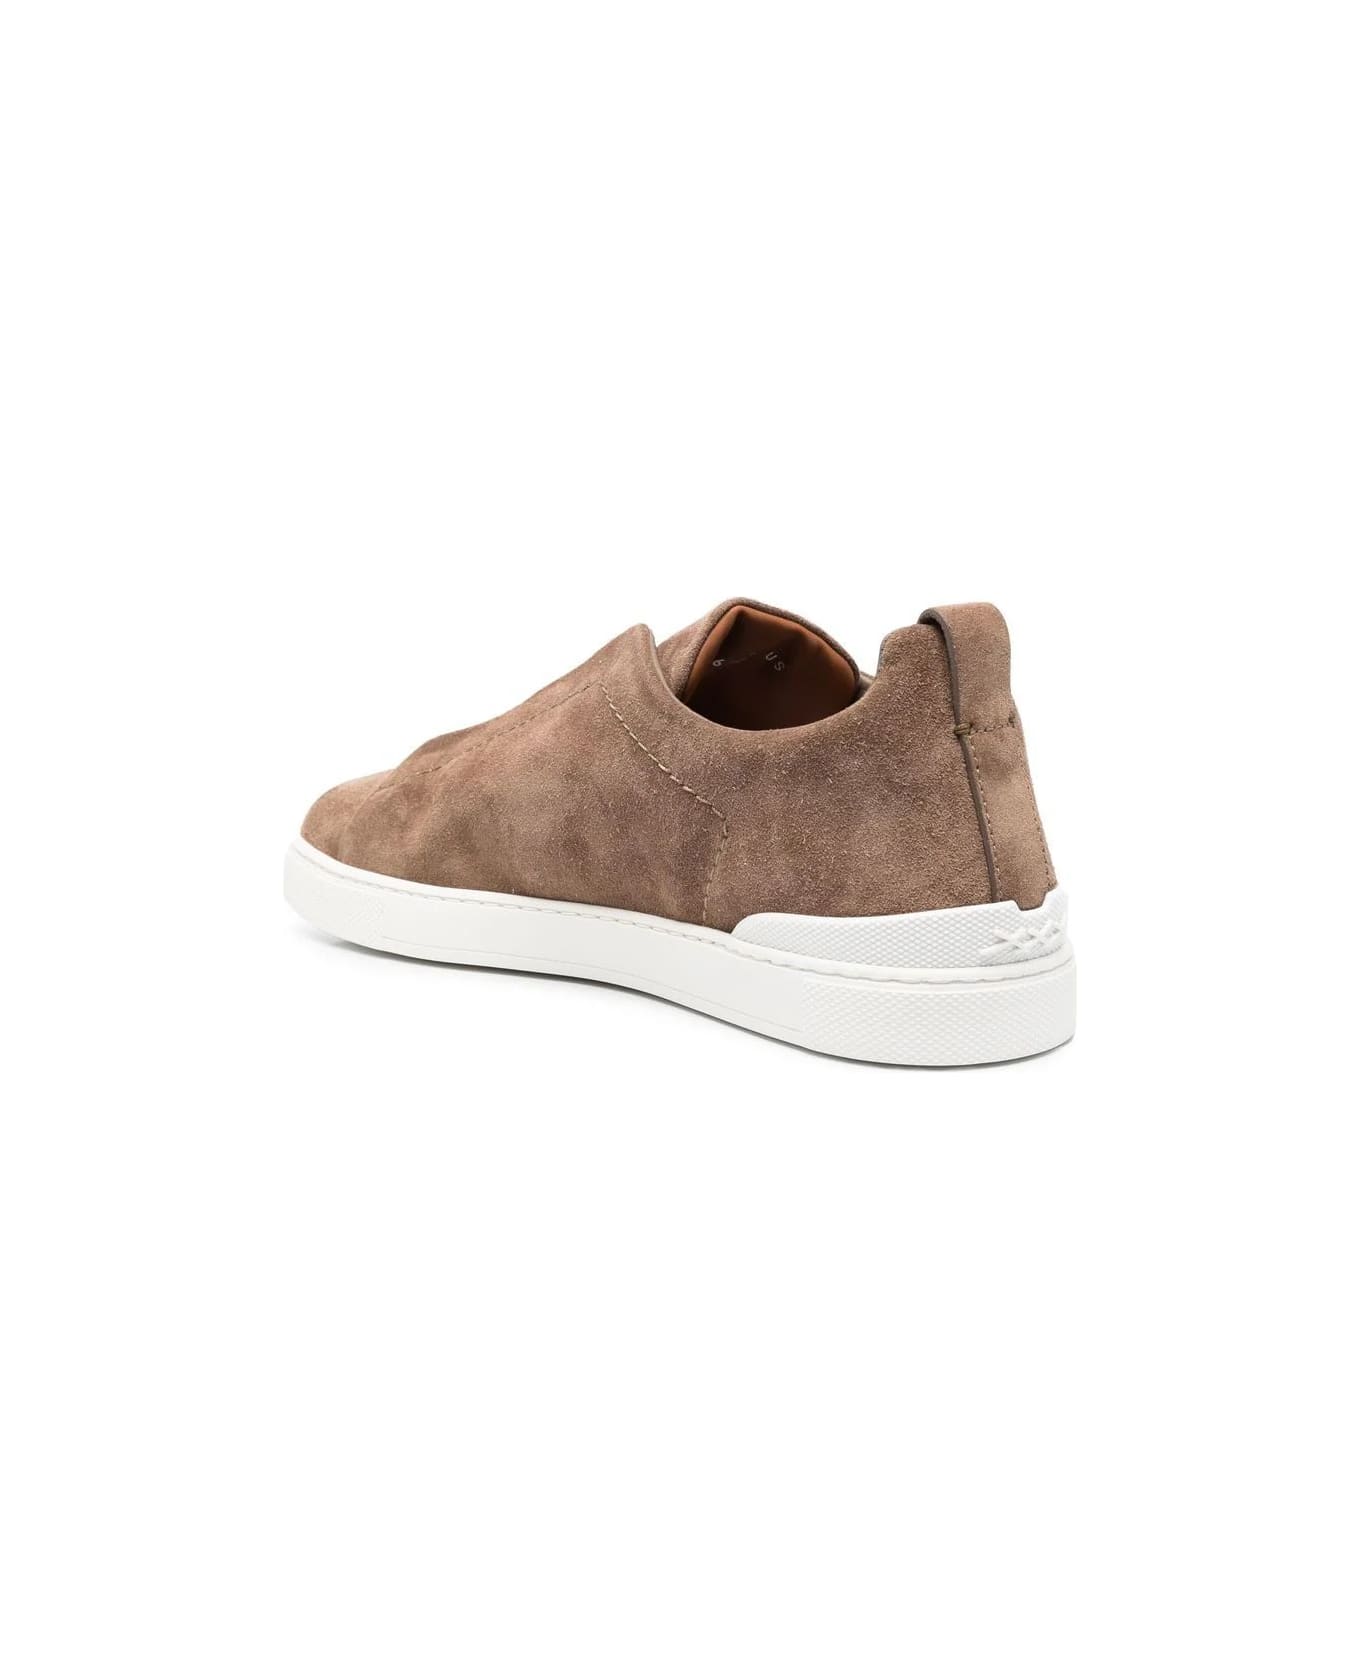 Zegna Triple Stitch Sneakers In Light Brown Suede - Brown